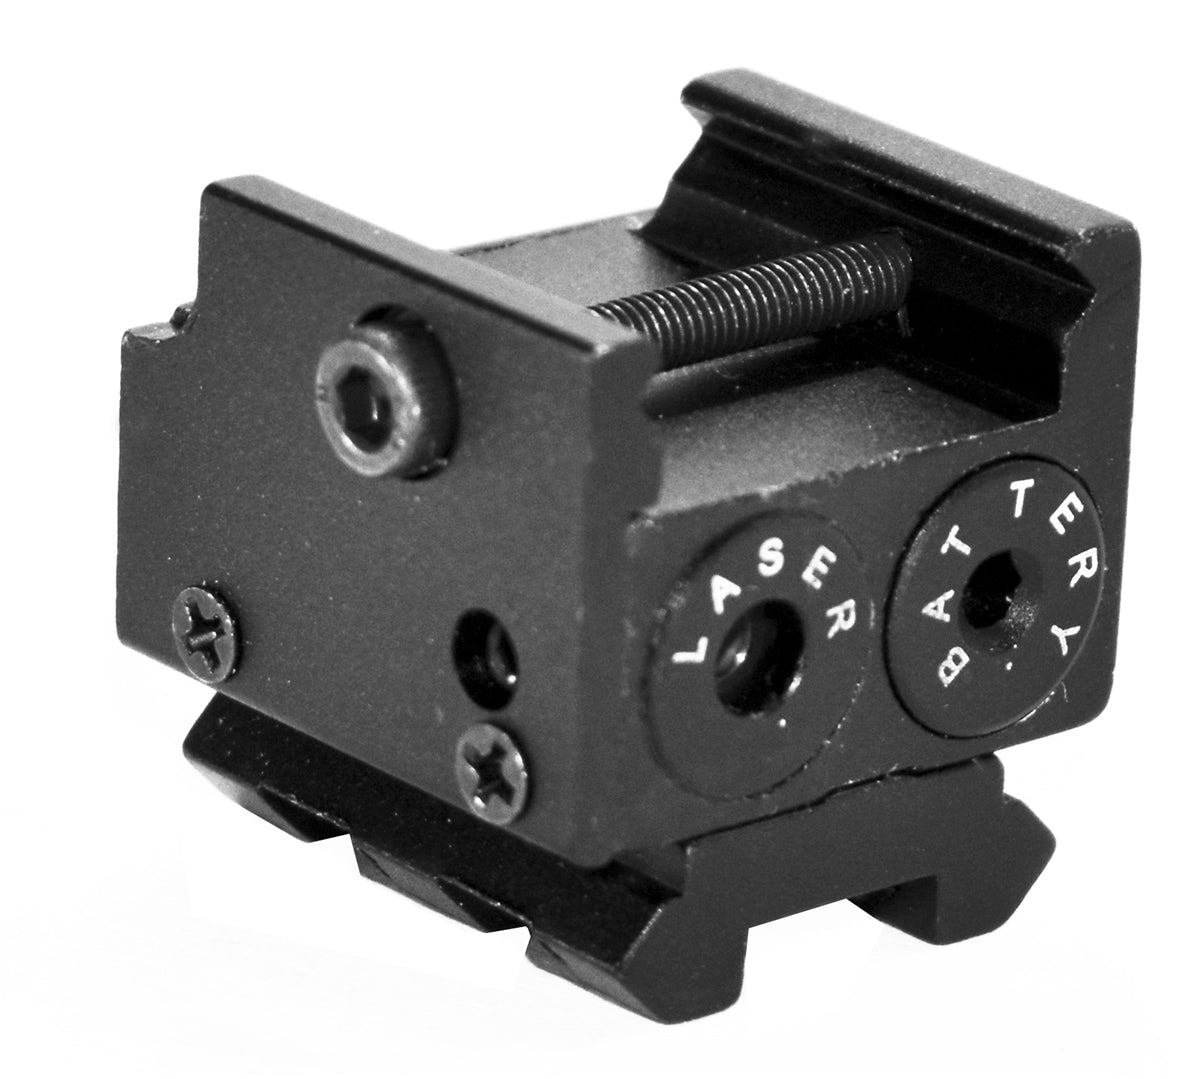 Trinity Compact red dot Sight for fn 509 Tactical Optics Home Defense Accessory Picatinny Weaver Mount Adapter Aluminum Black. - TRINITY SUPPLY INC